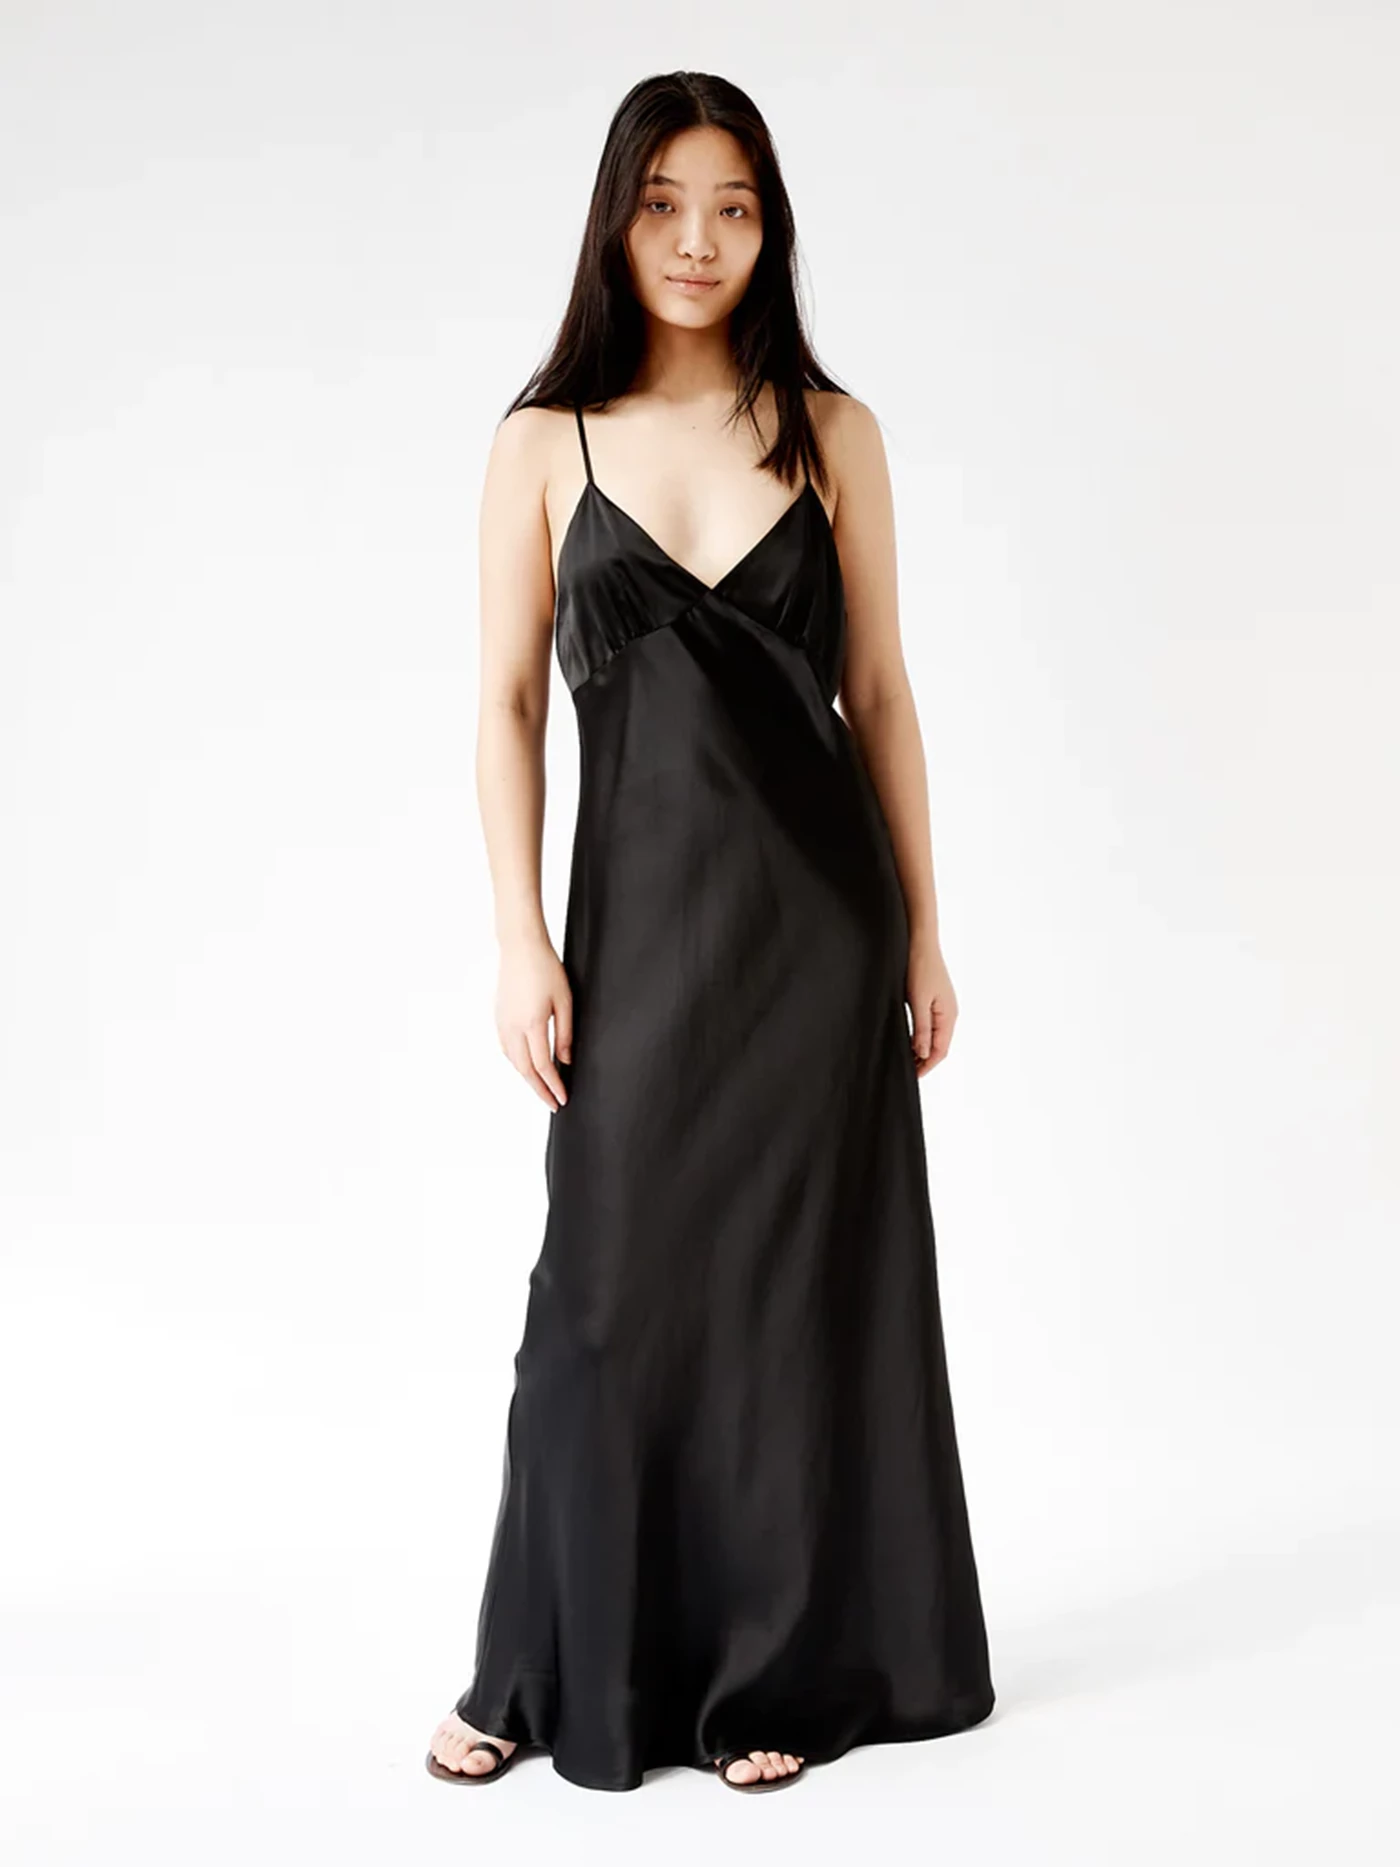 A woman in a black slip night gown.